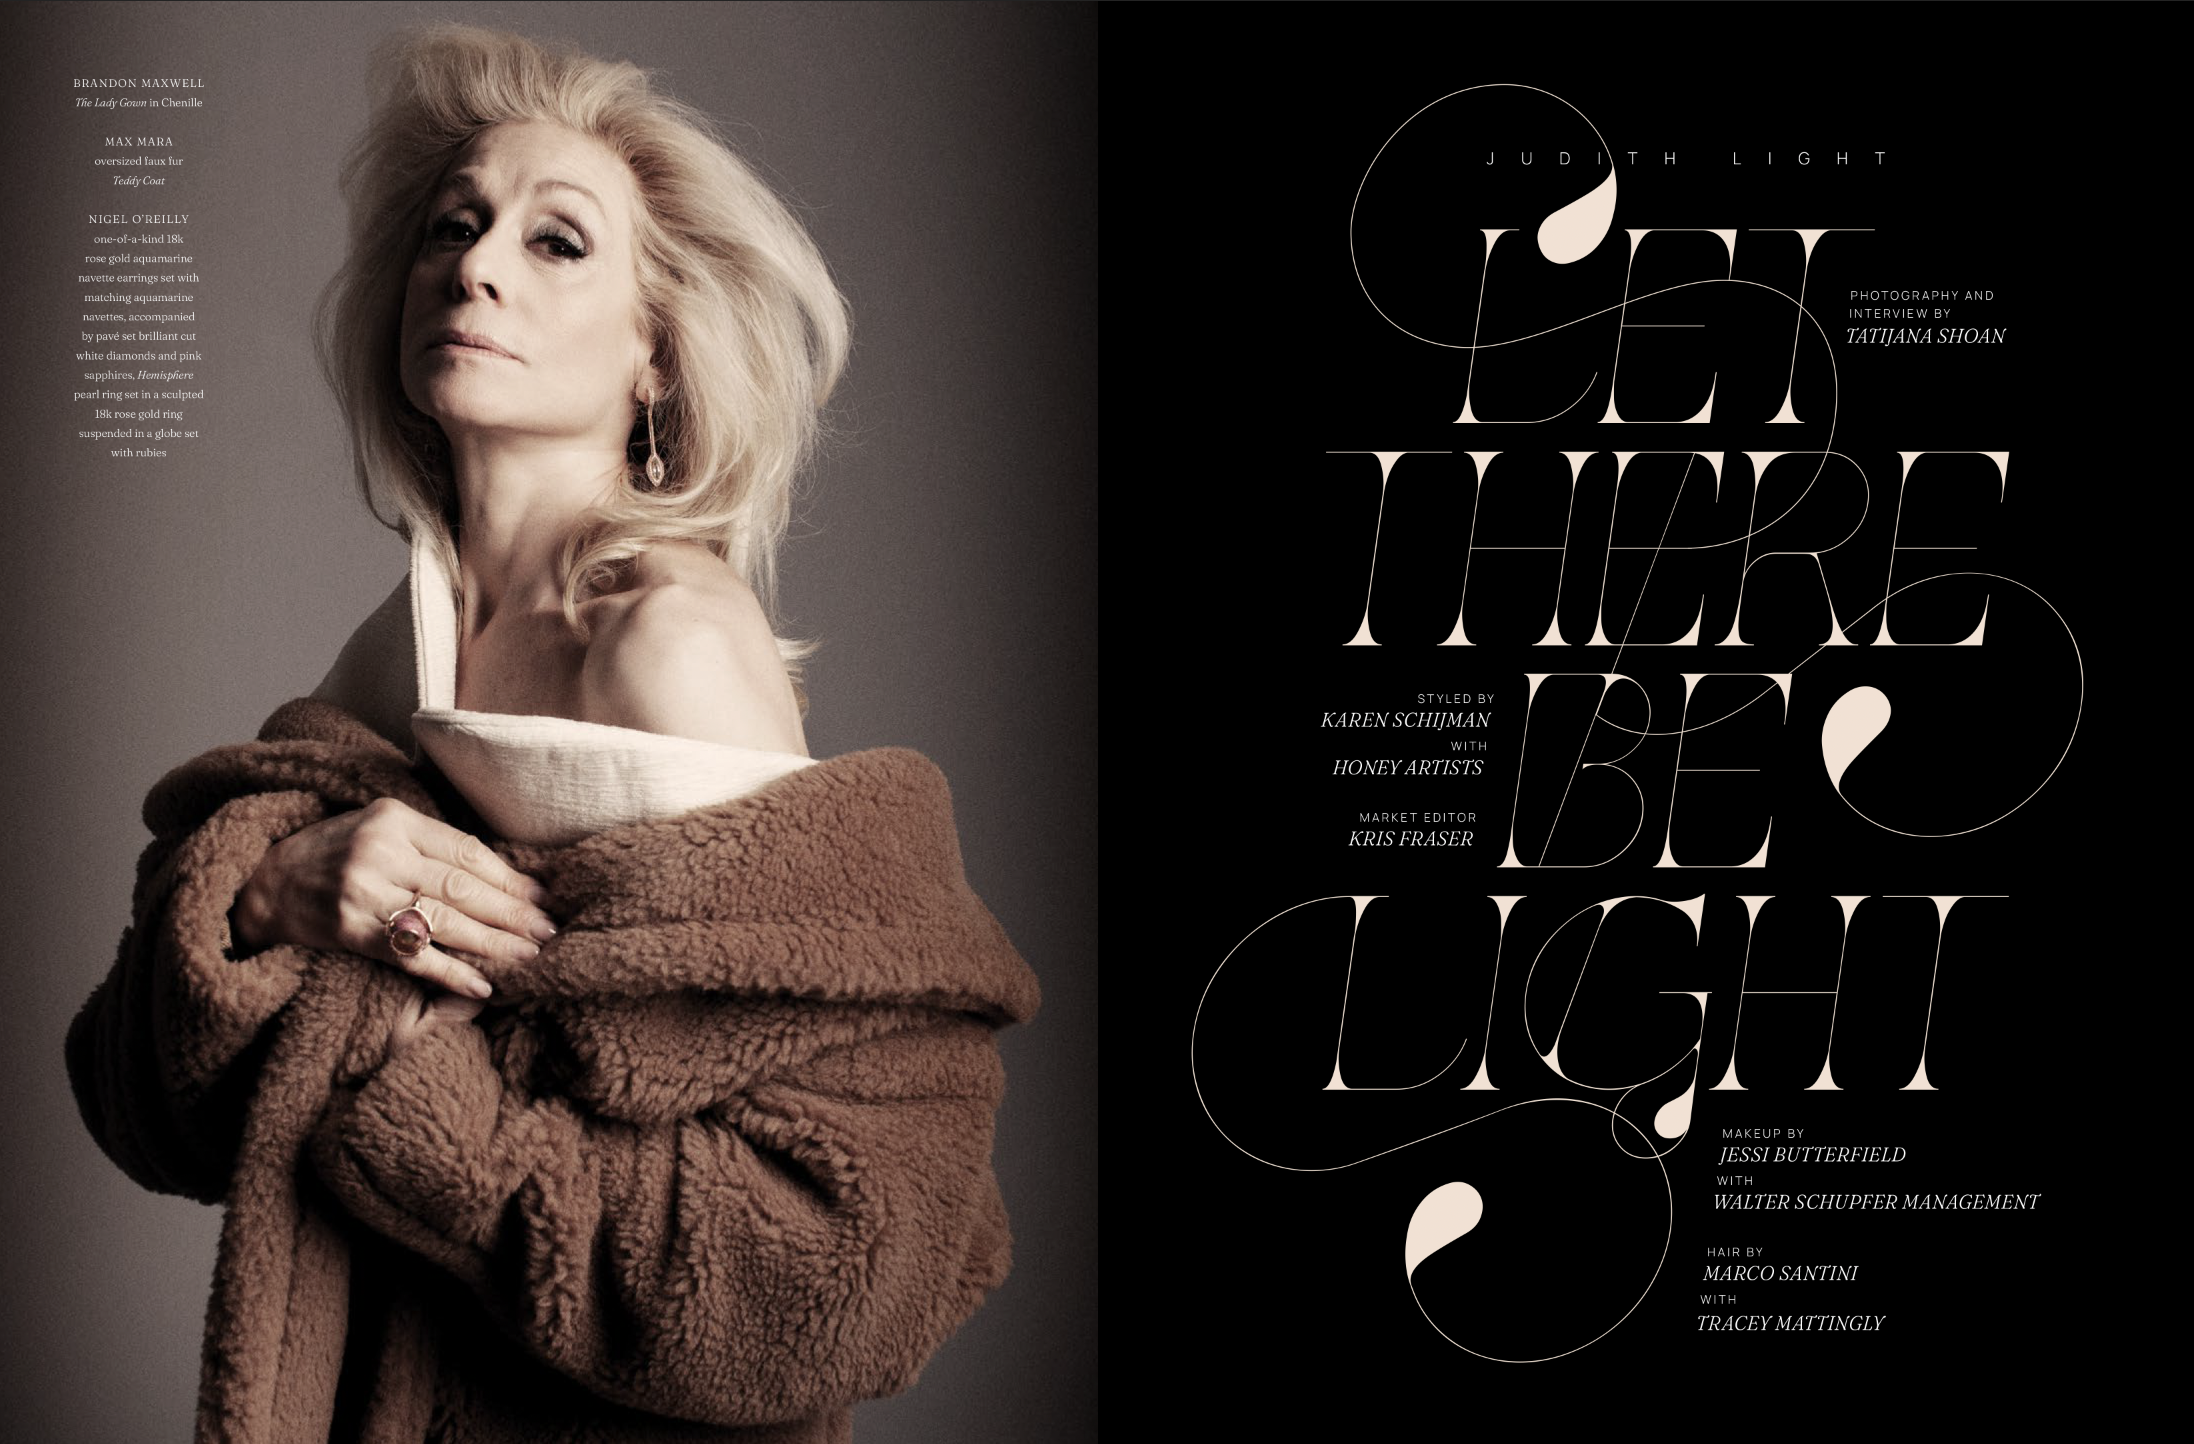 Judith Light with AS IF Magazine